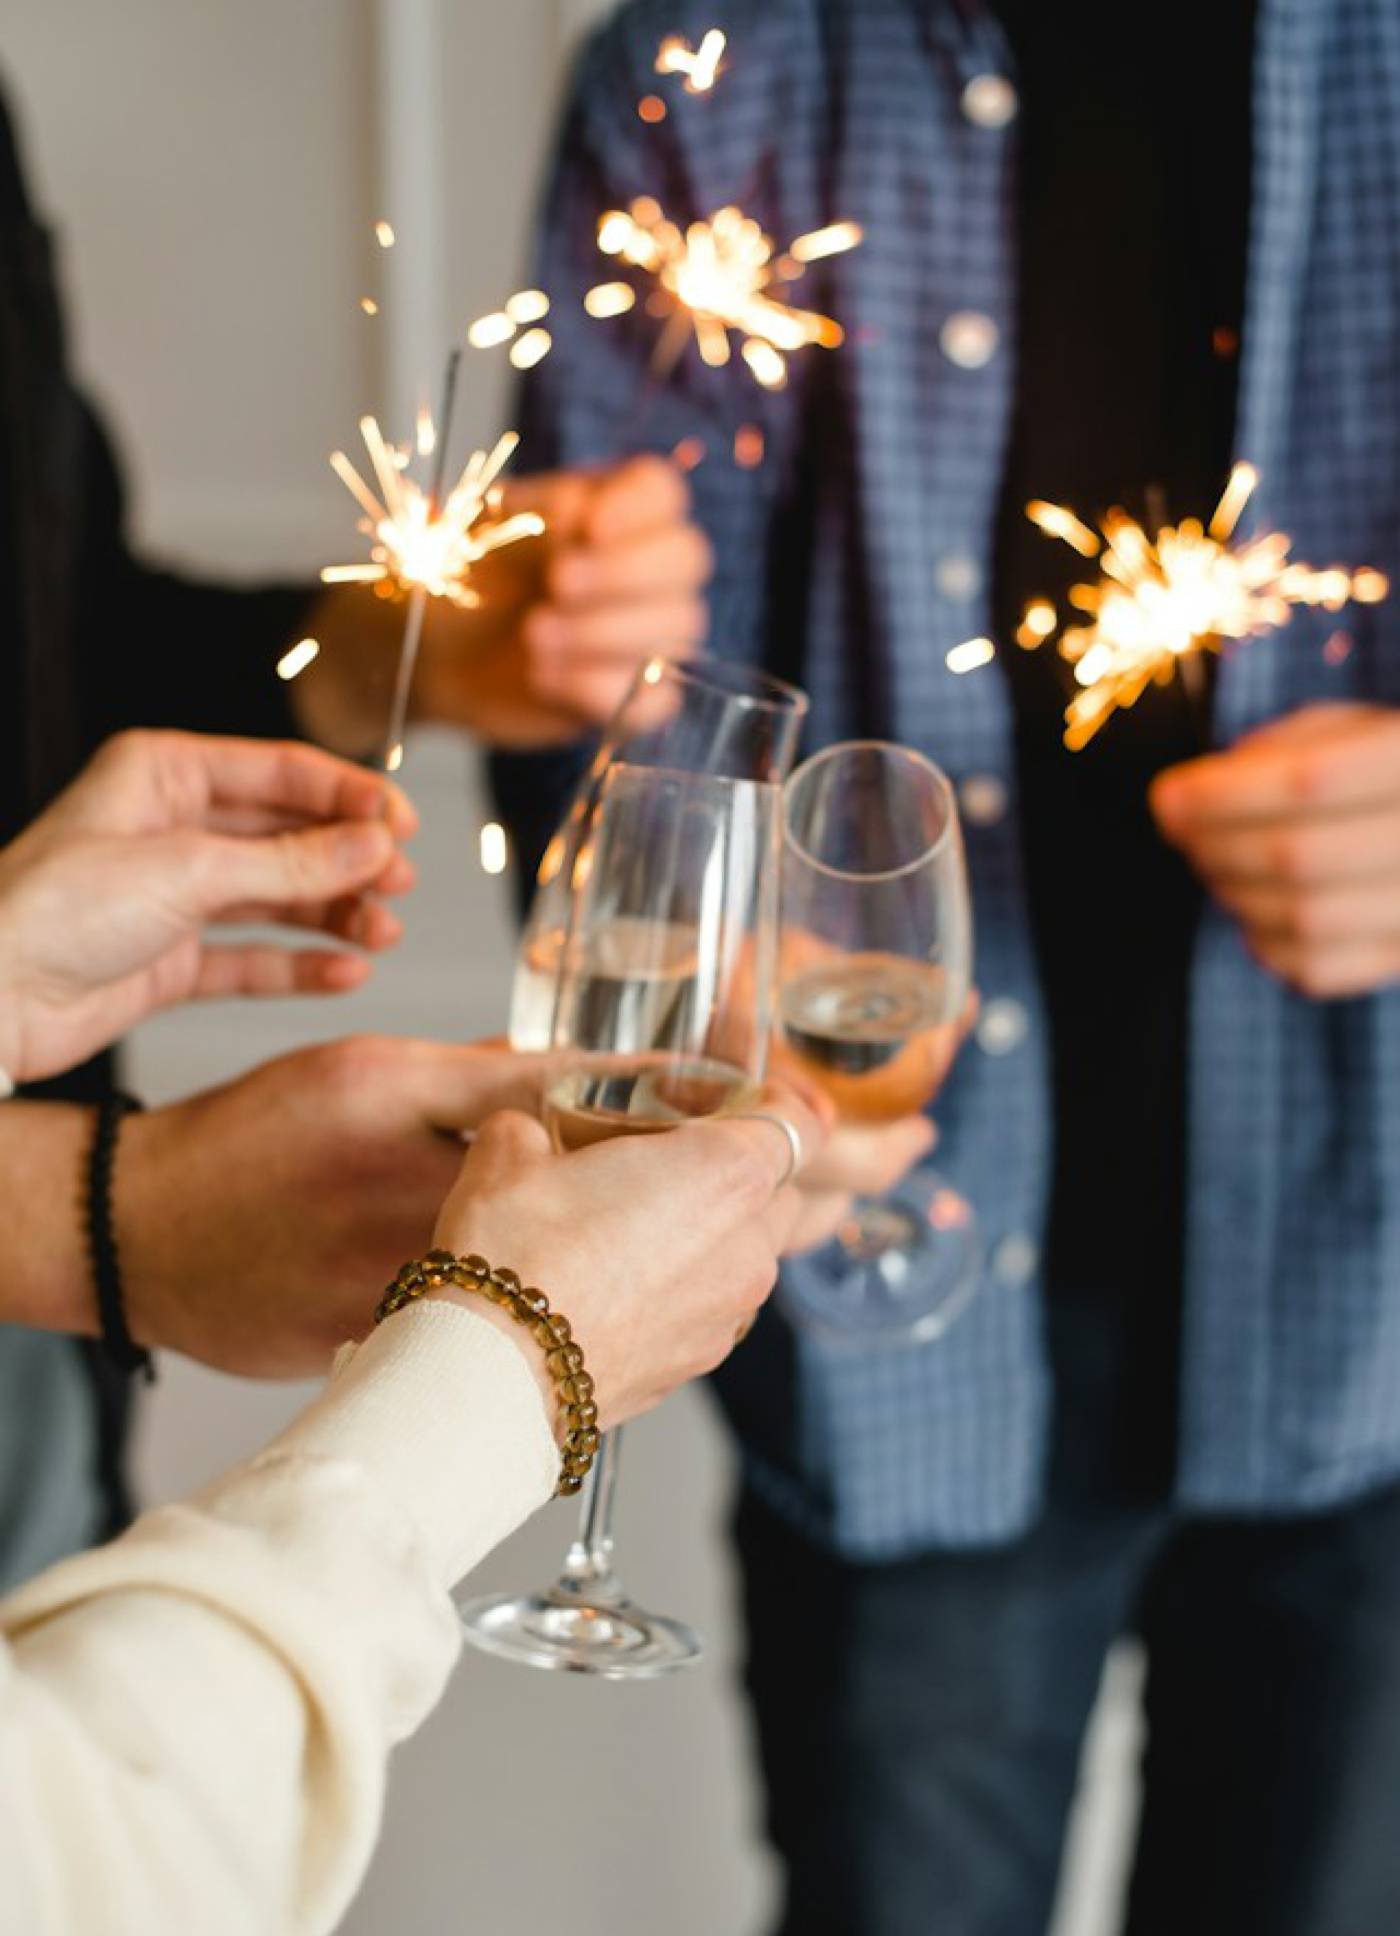 Group of friends holding sparklers and toasting with glasses of champagne at an end-of-year party